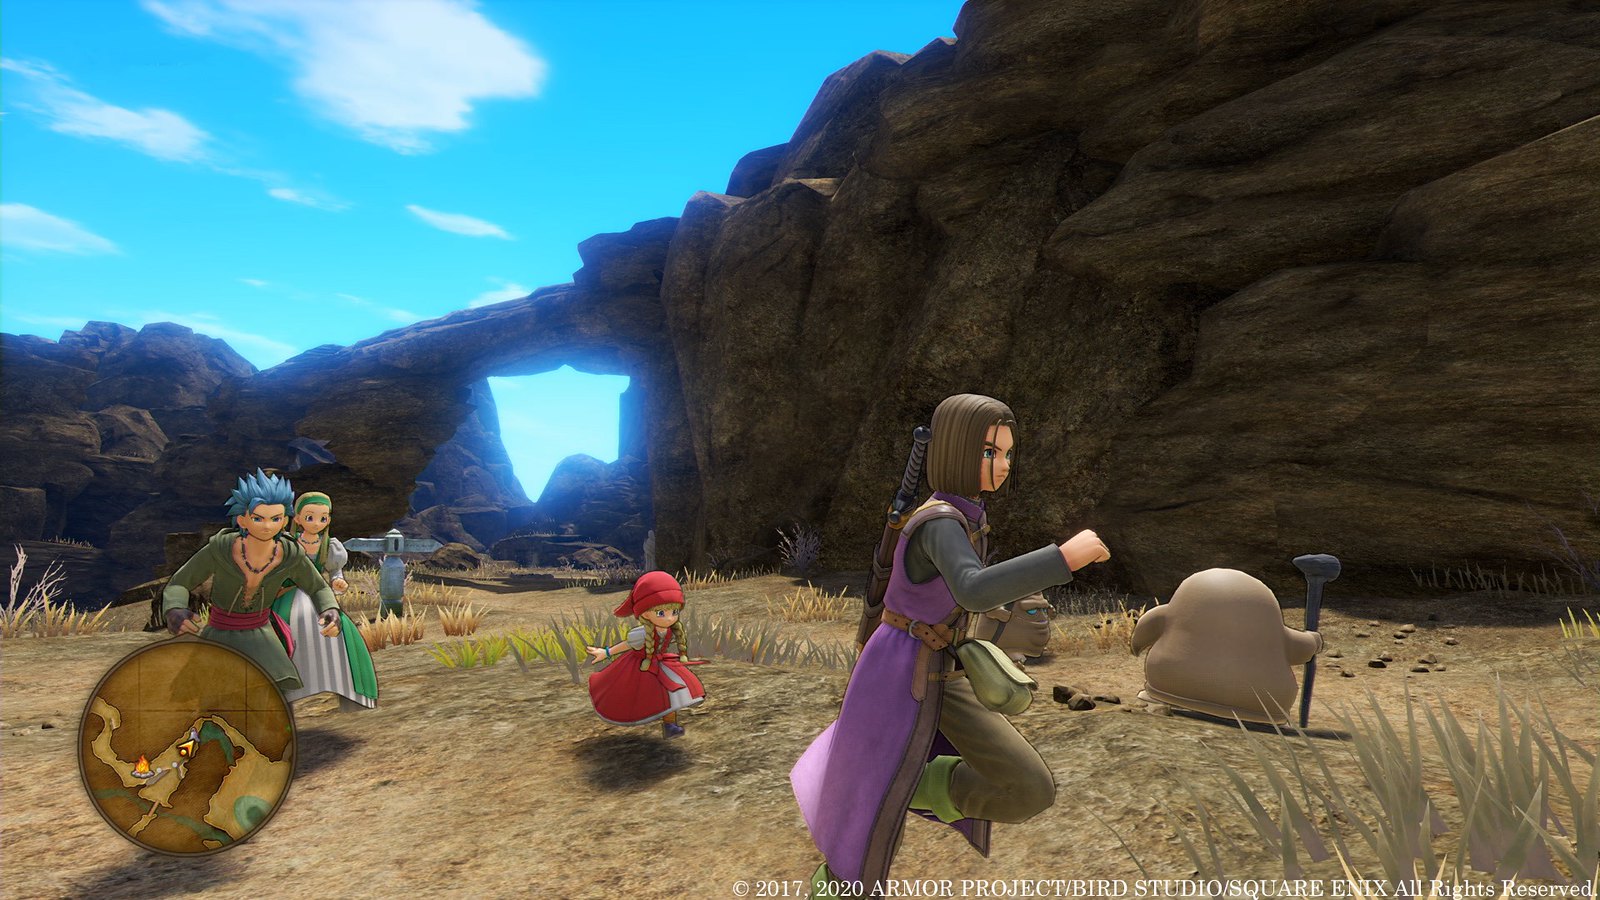 Dragon Quest XI S: Echoes of an Elusive Age - Definitive Edition